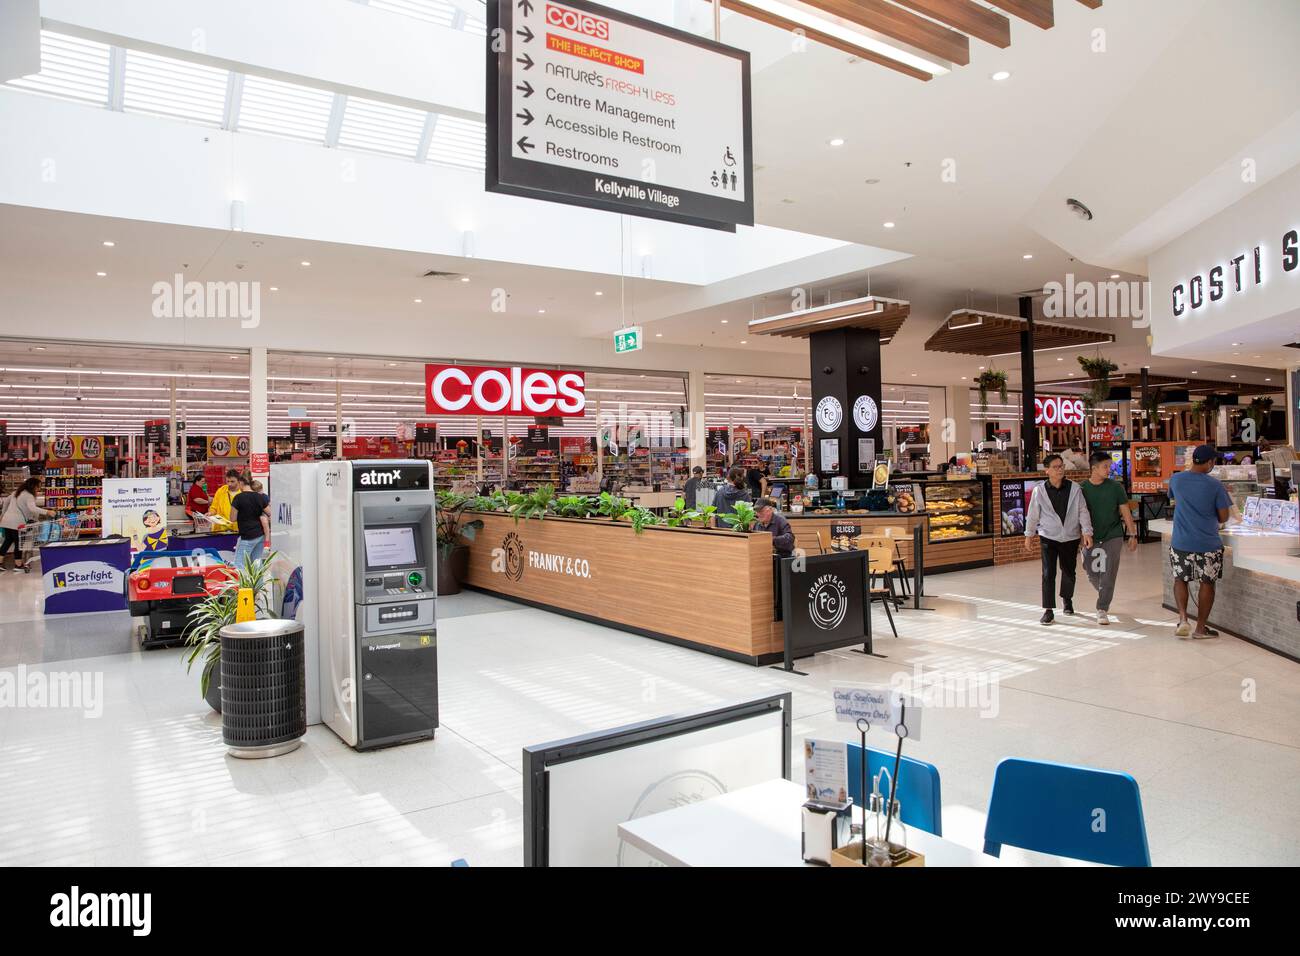 Kellyville, Sydney, interior of the Kellyville Shopping village in this Sydney suburb, with Coles Supermarket, NSW,Australia Stock Photo